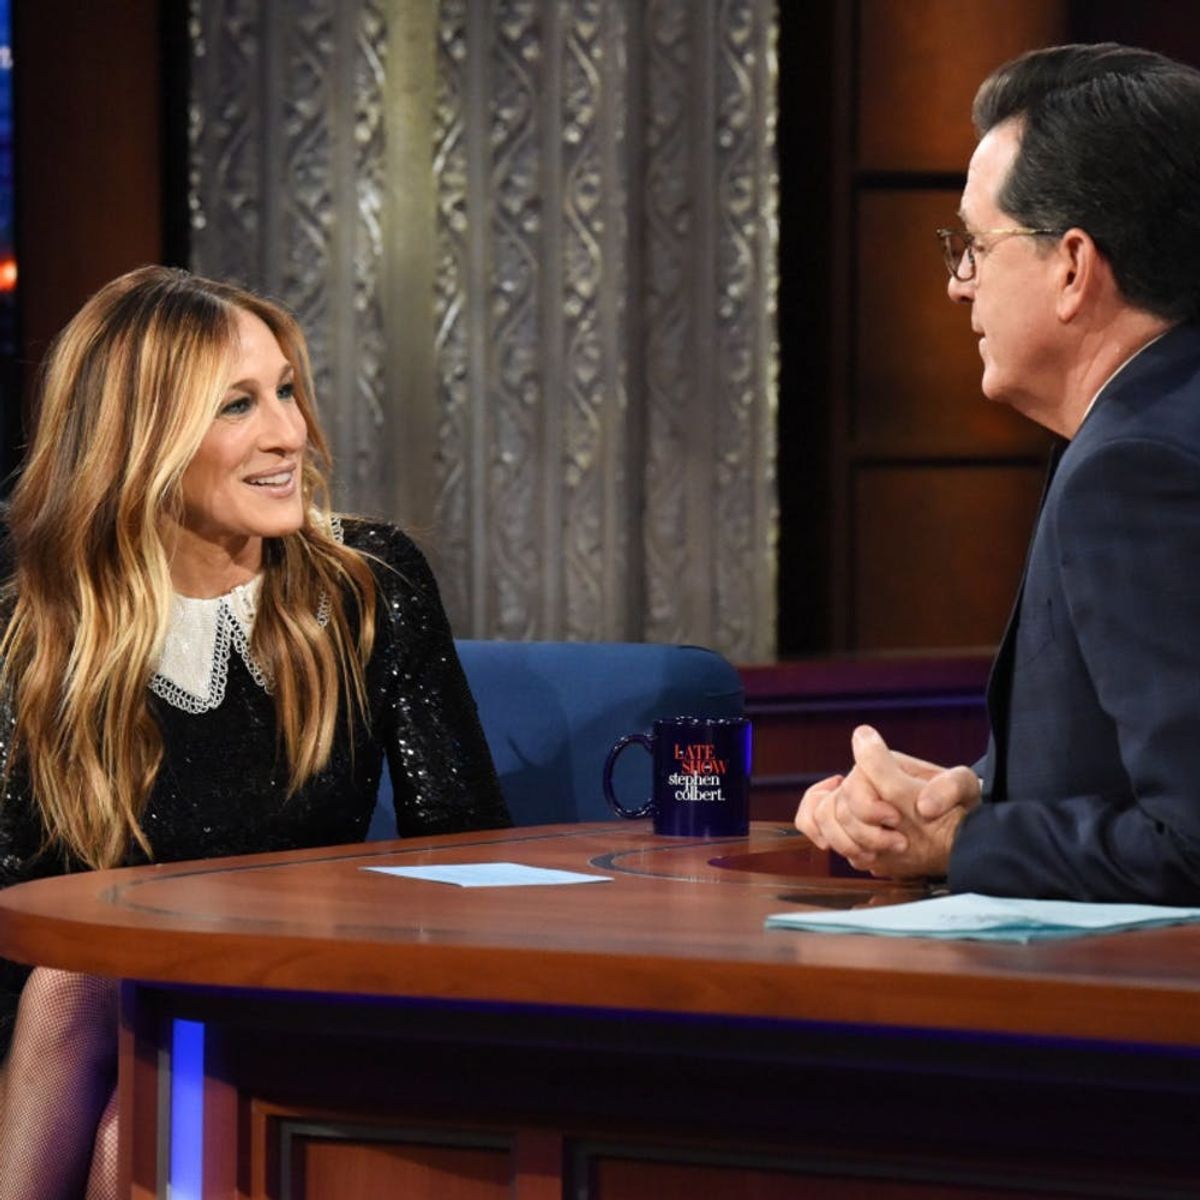 Sarah Jessica Parker Offers Kim Cattrall’s ‘Sex and the City’ Role to Stephen Colbert